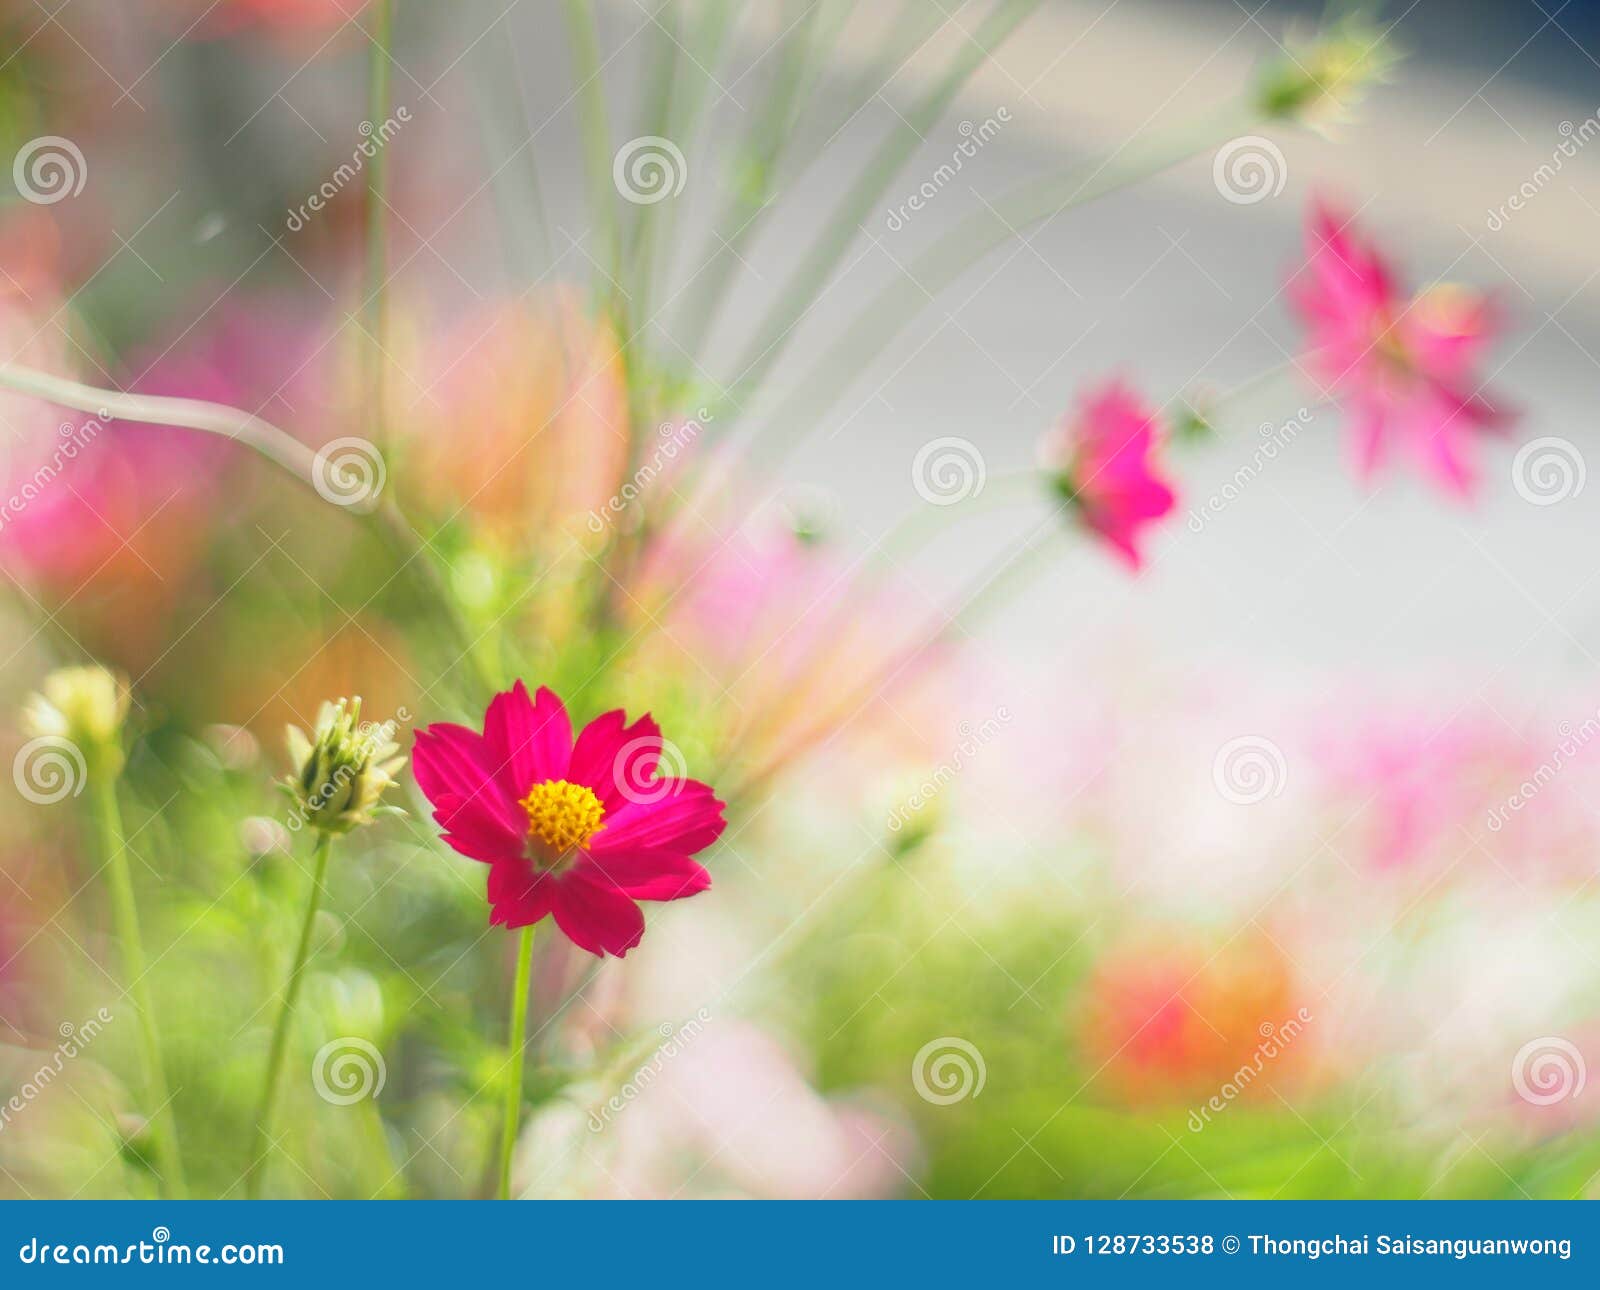 red mexican aster or cosmos flower with the scientific name: cosmos